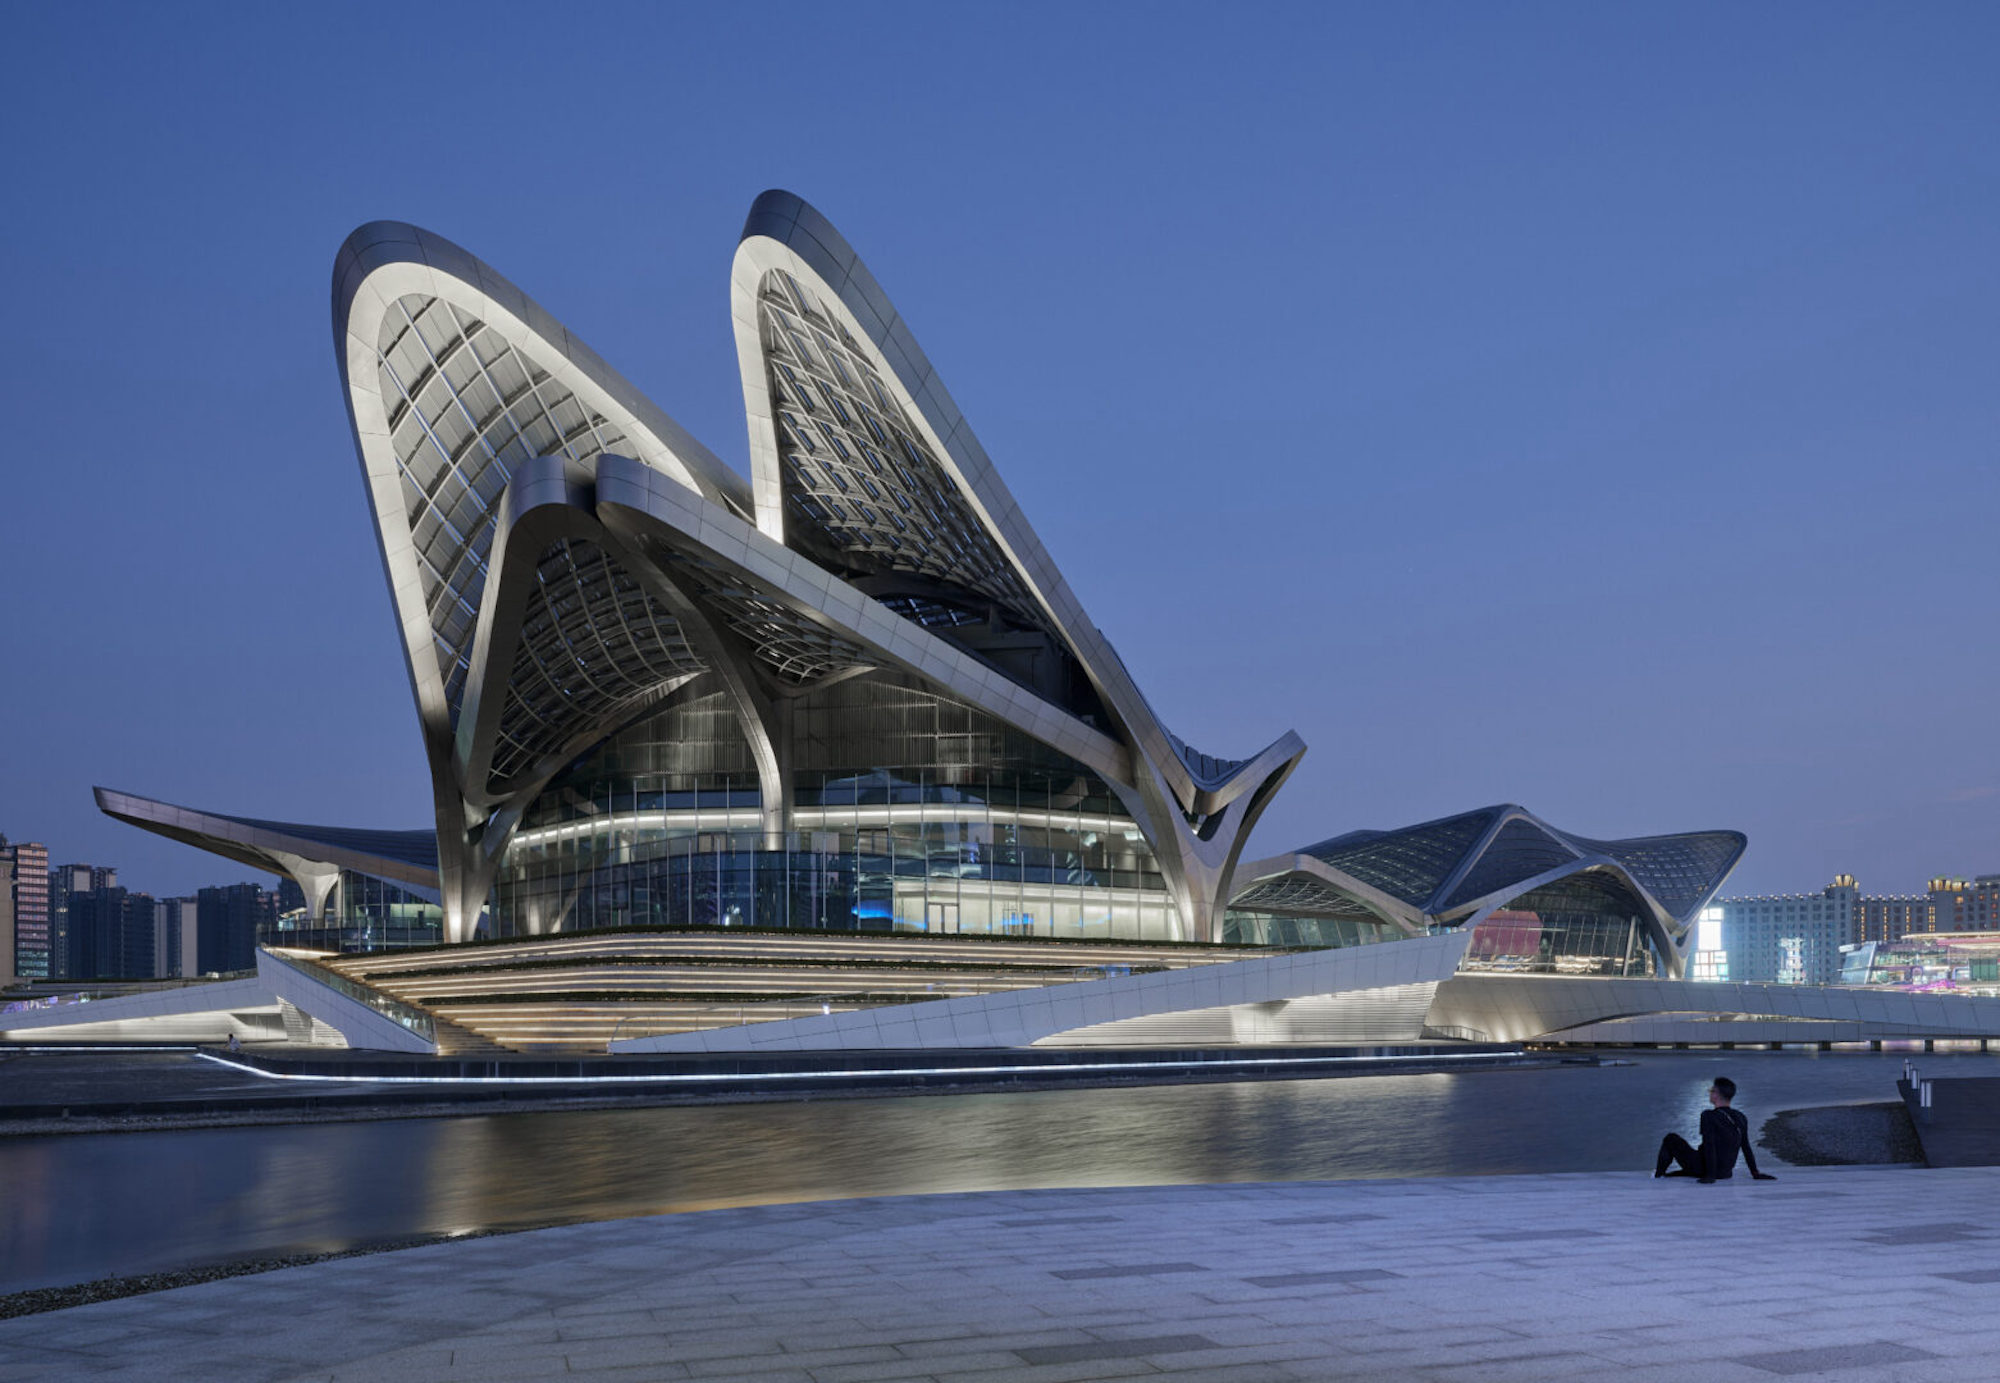 Here’s a first look at the Zhuhai Jinwan Civic Art Centre